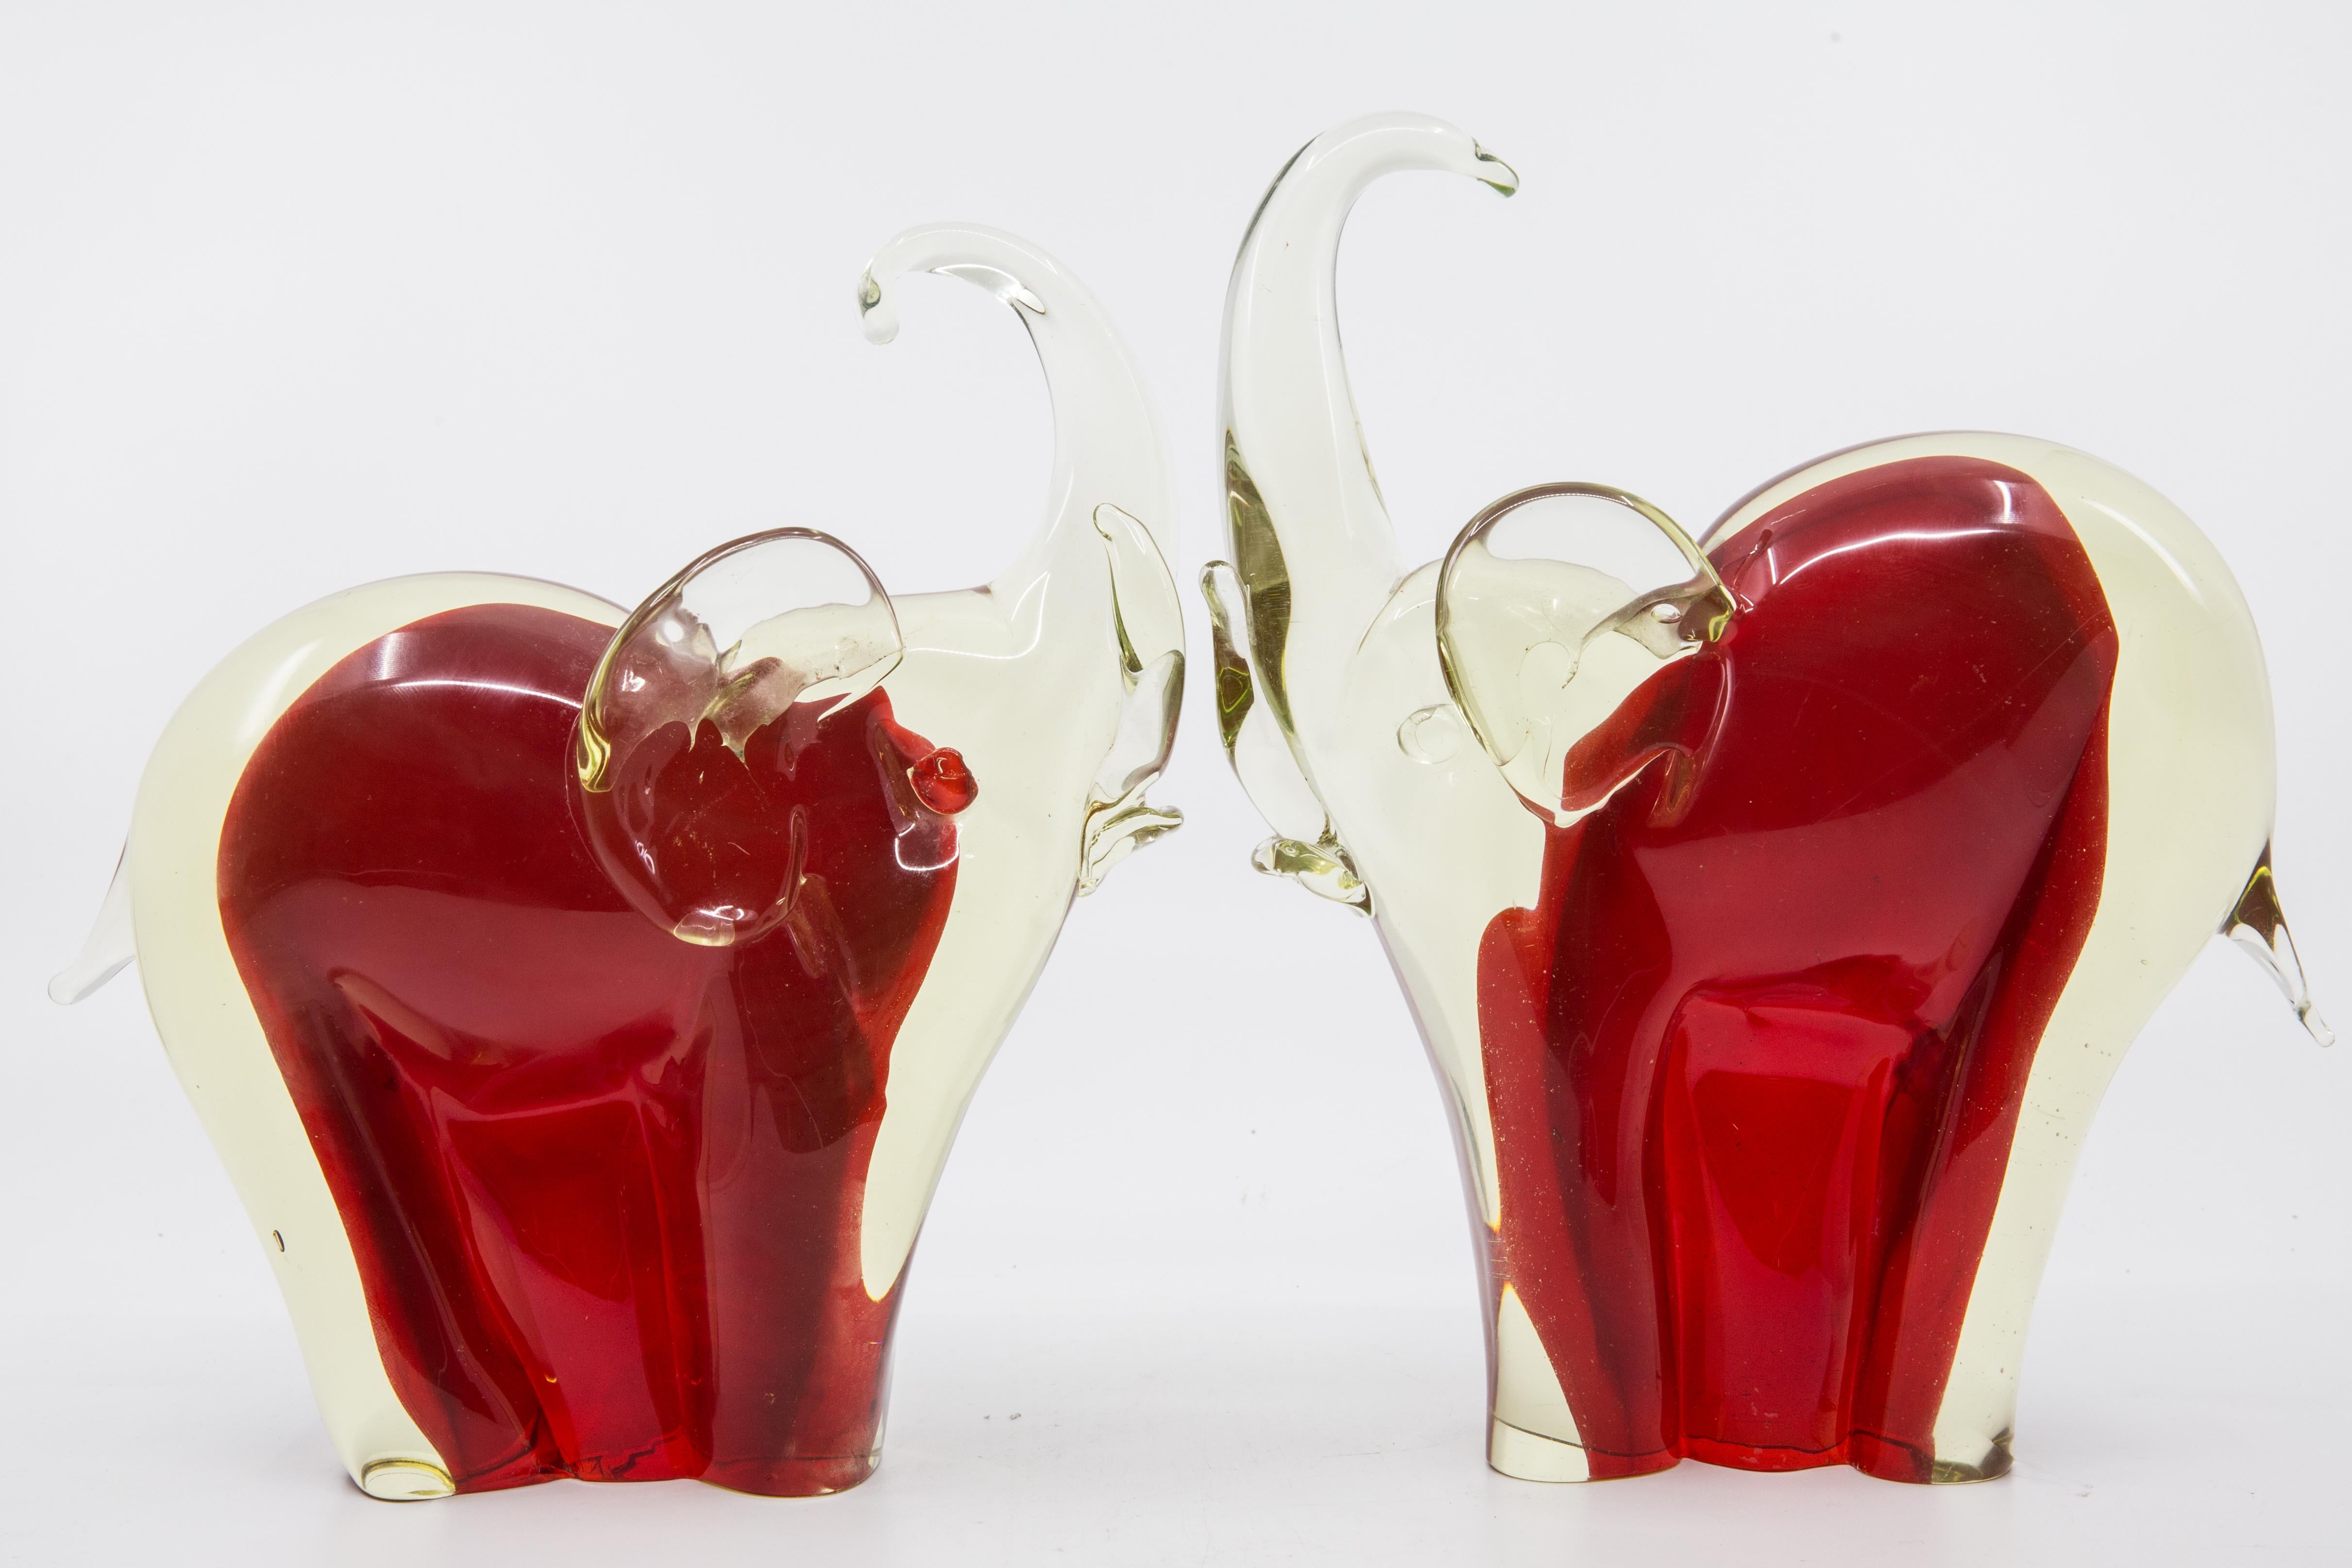 Offered is a Murano glass hand blown pair of elephant sculptures or book-ends. The pair dates from mid-century and measures 9” in height.